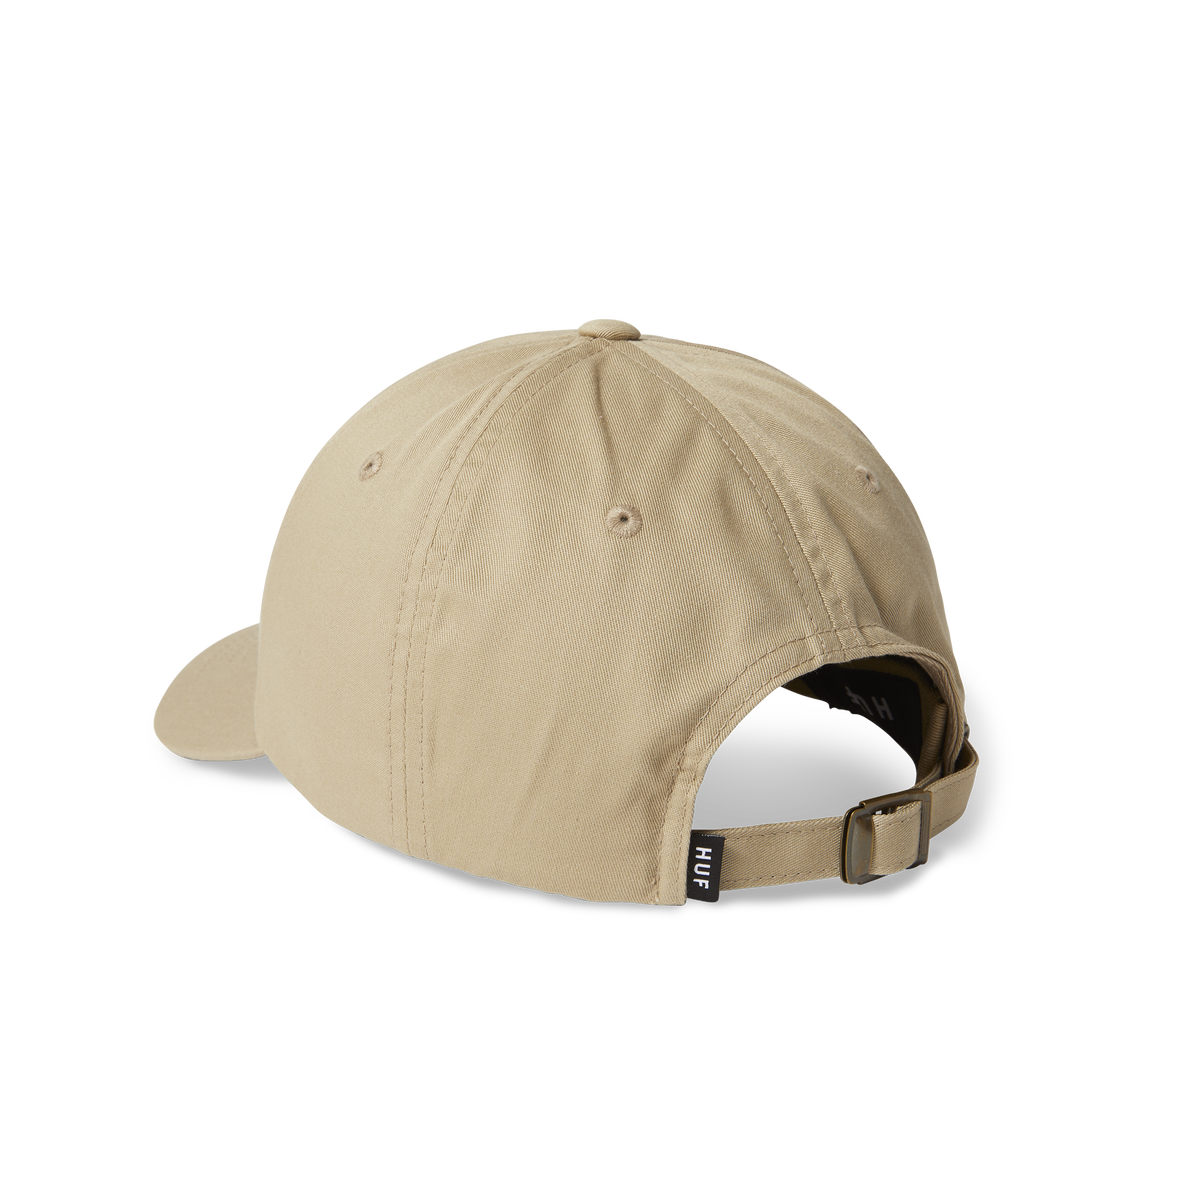 HUF - SIPPIN' SUN CURVED VISOR 6-PANEL HAT - CLAY